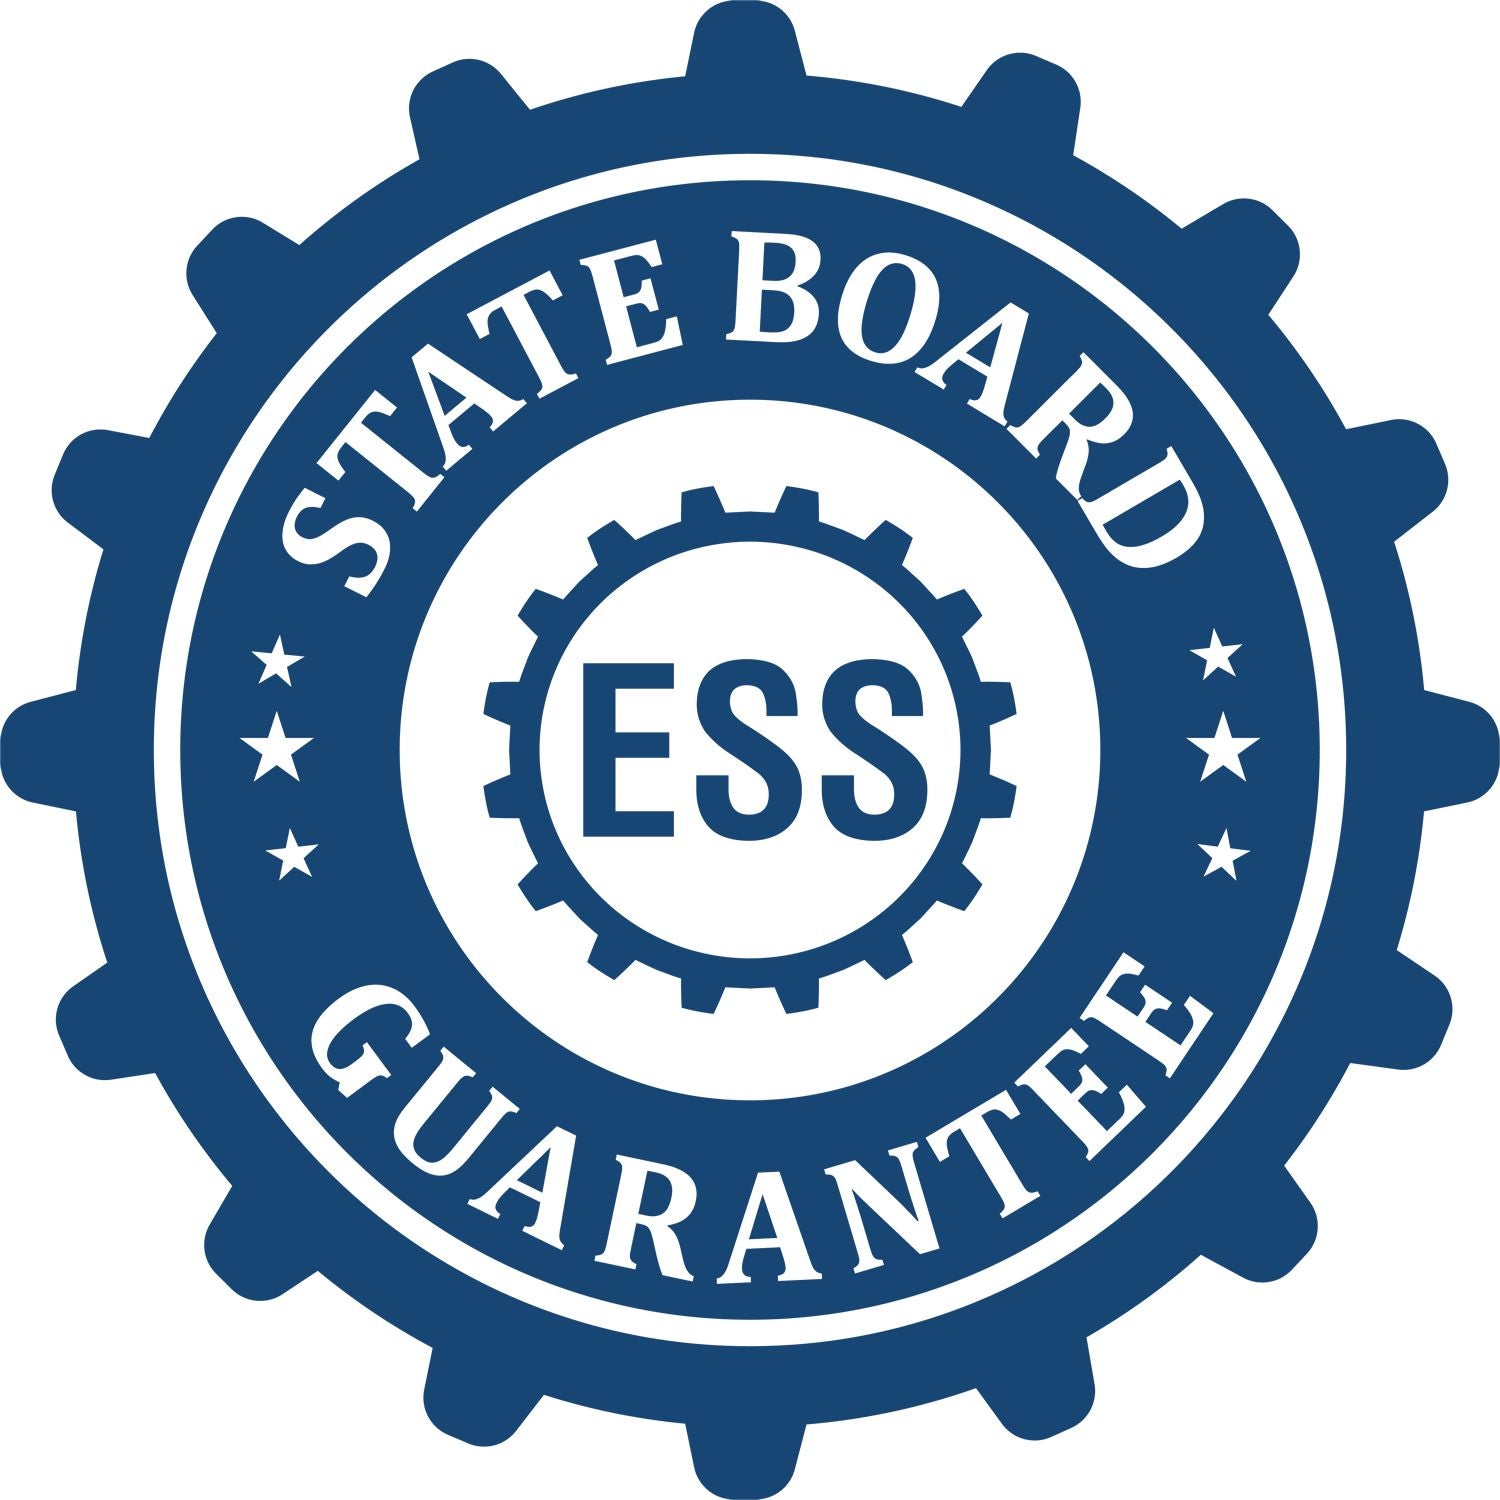 An emblem in a gear shape illustrating a state board guarantee for the Puerto Rico Engineer Desk Seal product.